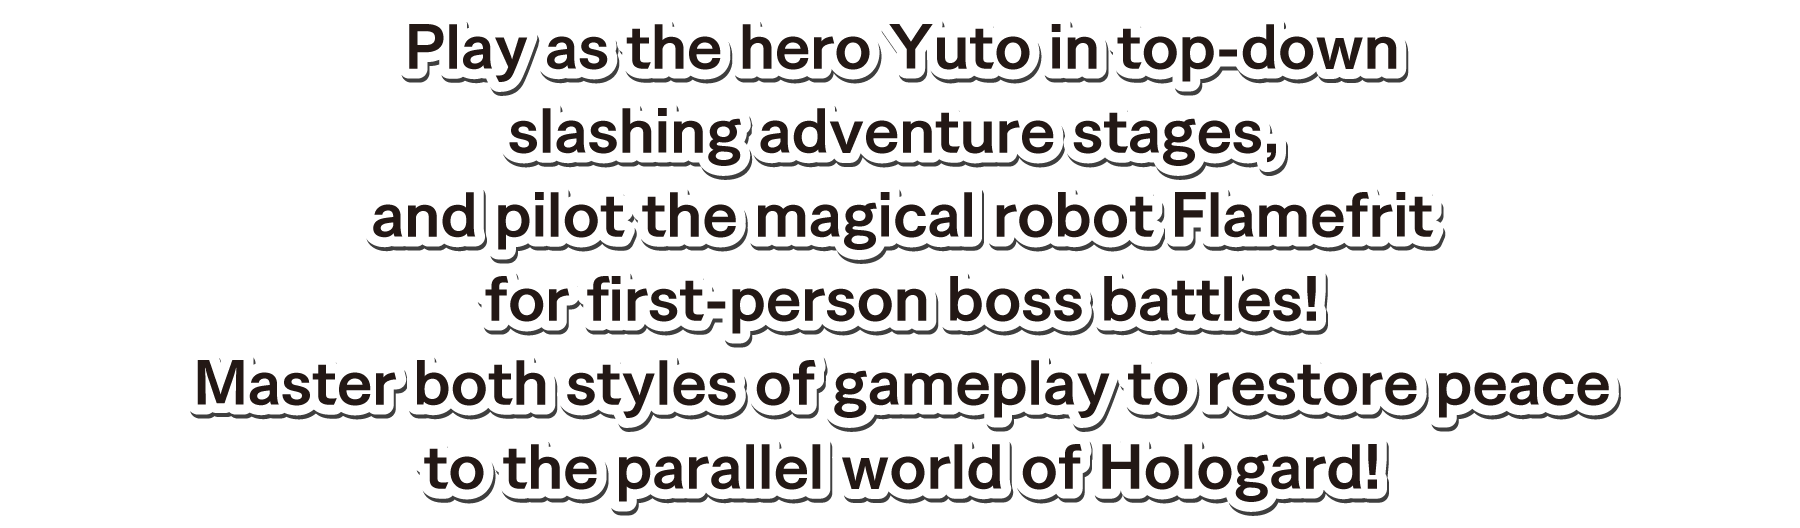 Play as the hero Yuto in top-down slashing adventure stages, and pilot the magical robot Flamefrit for first-person boss battles!Master both styles of gameplay to restore peace to the parallel world of Hologard!